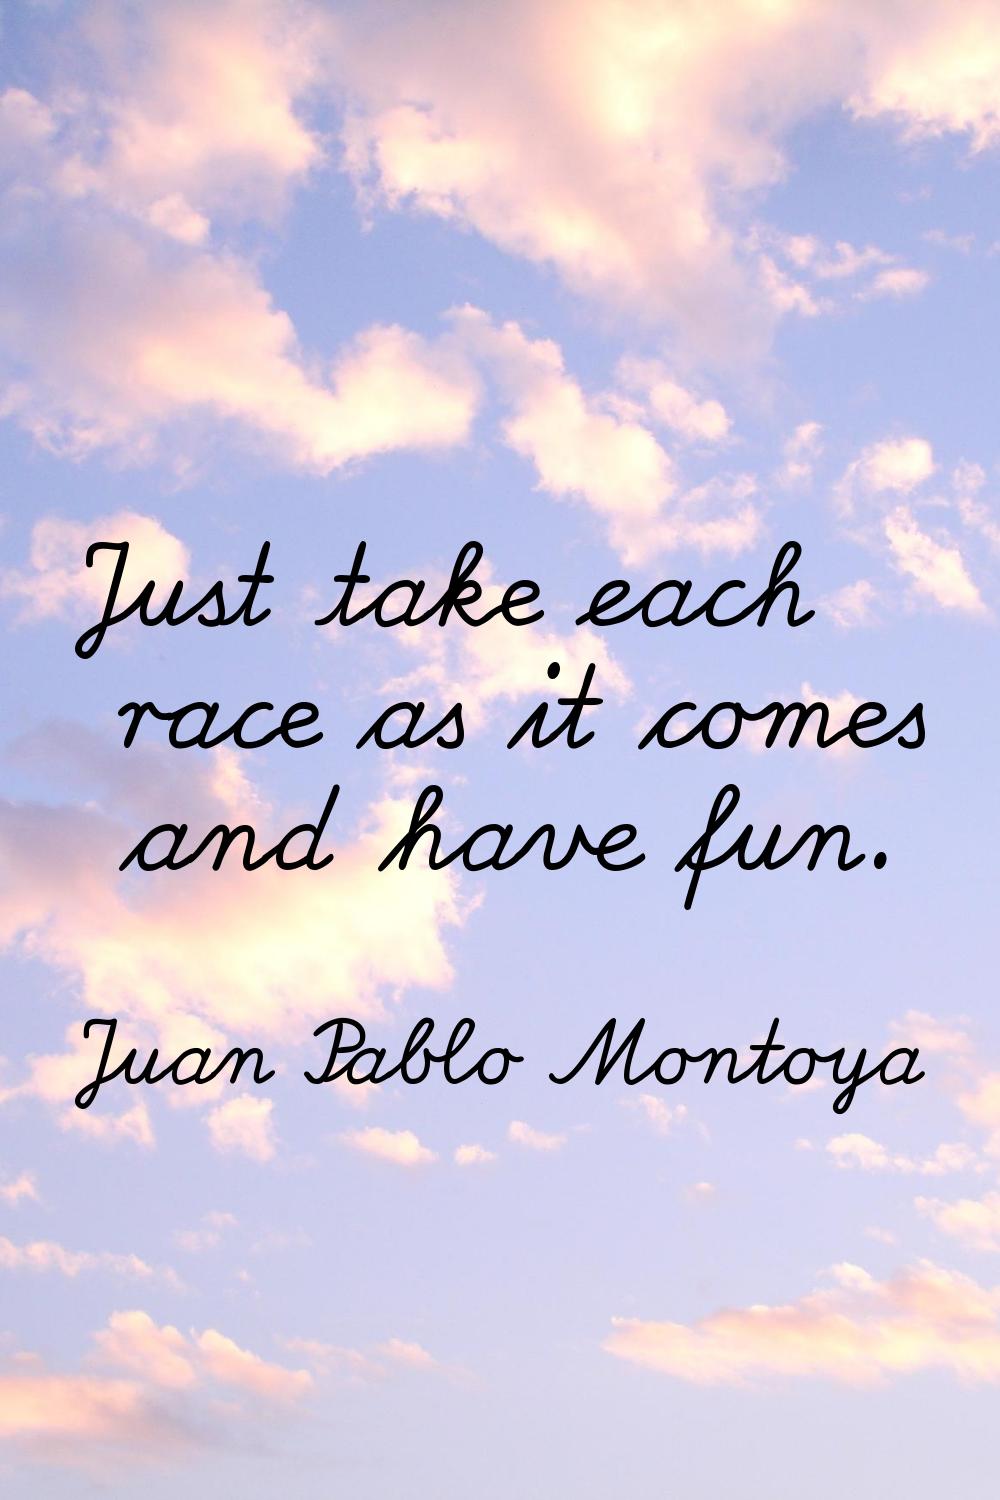 Just take each race as it comes and have fun.